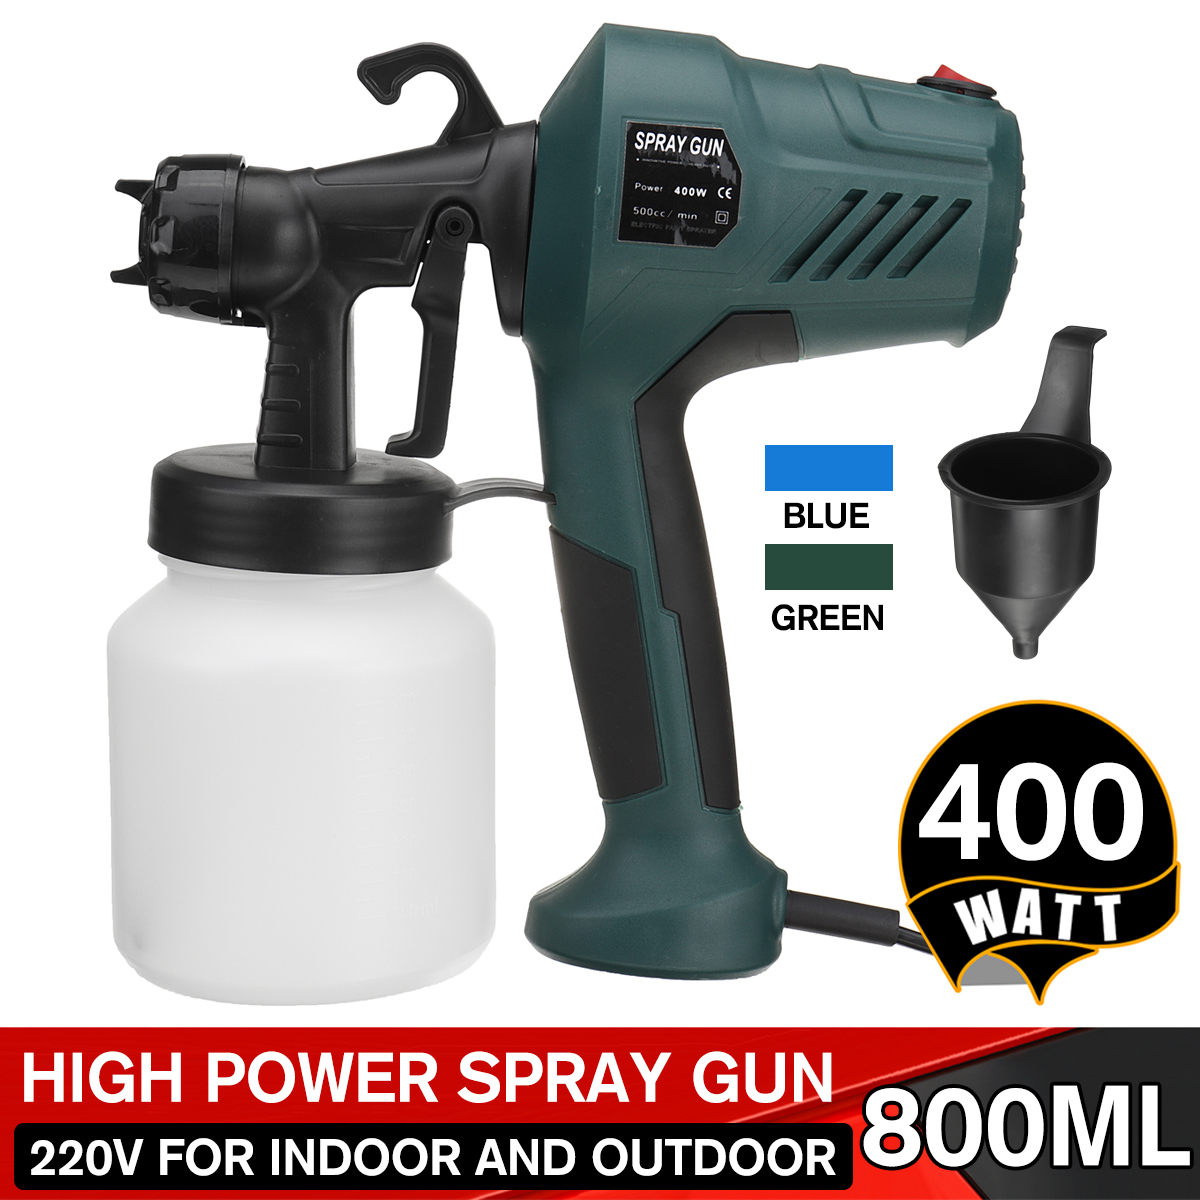 800ml-220V-400W-High-Power-Electric-Machine-Paint-Sprayer-Painting-Fogger-Sprayer-Tool-For-Indoor-An-1716537-3